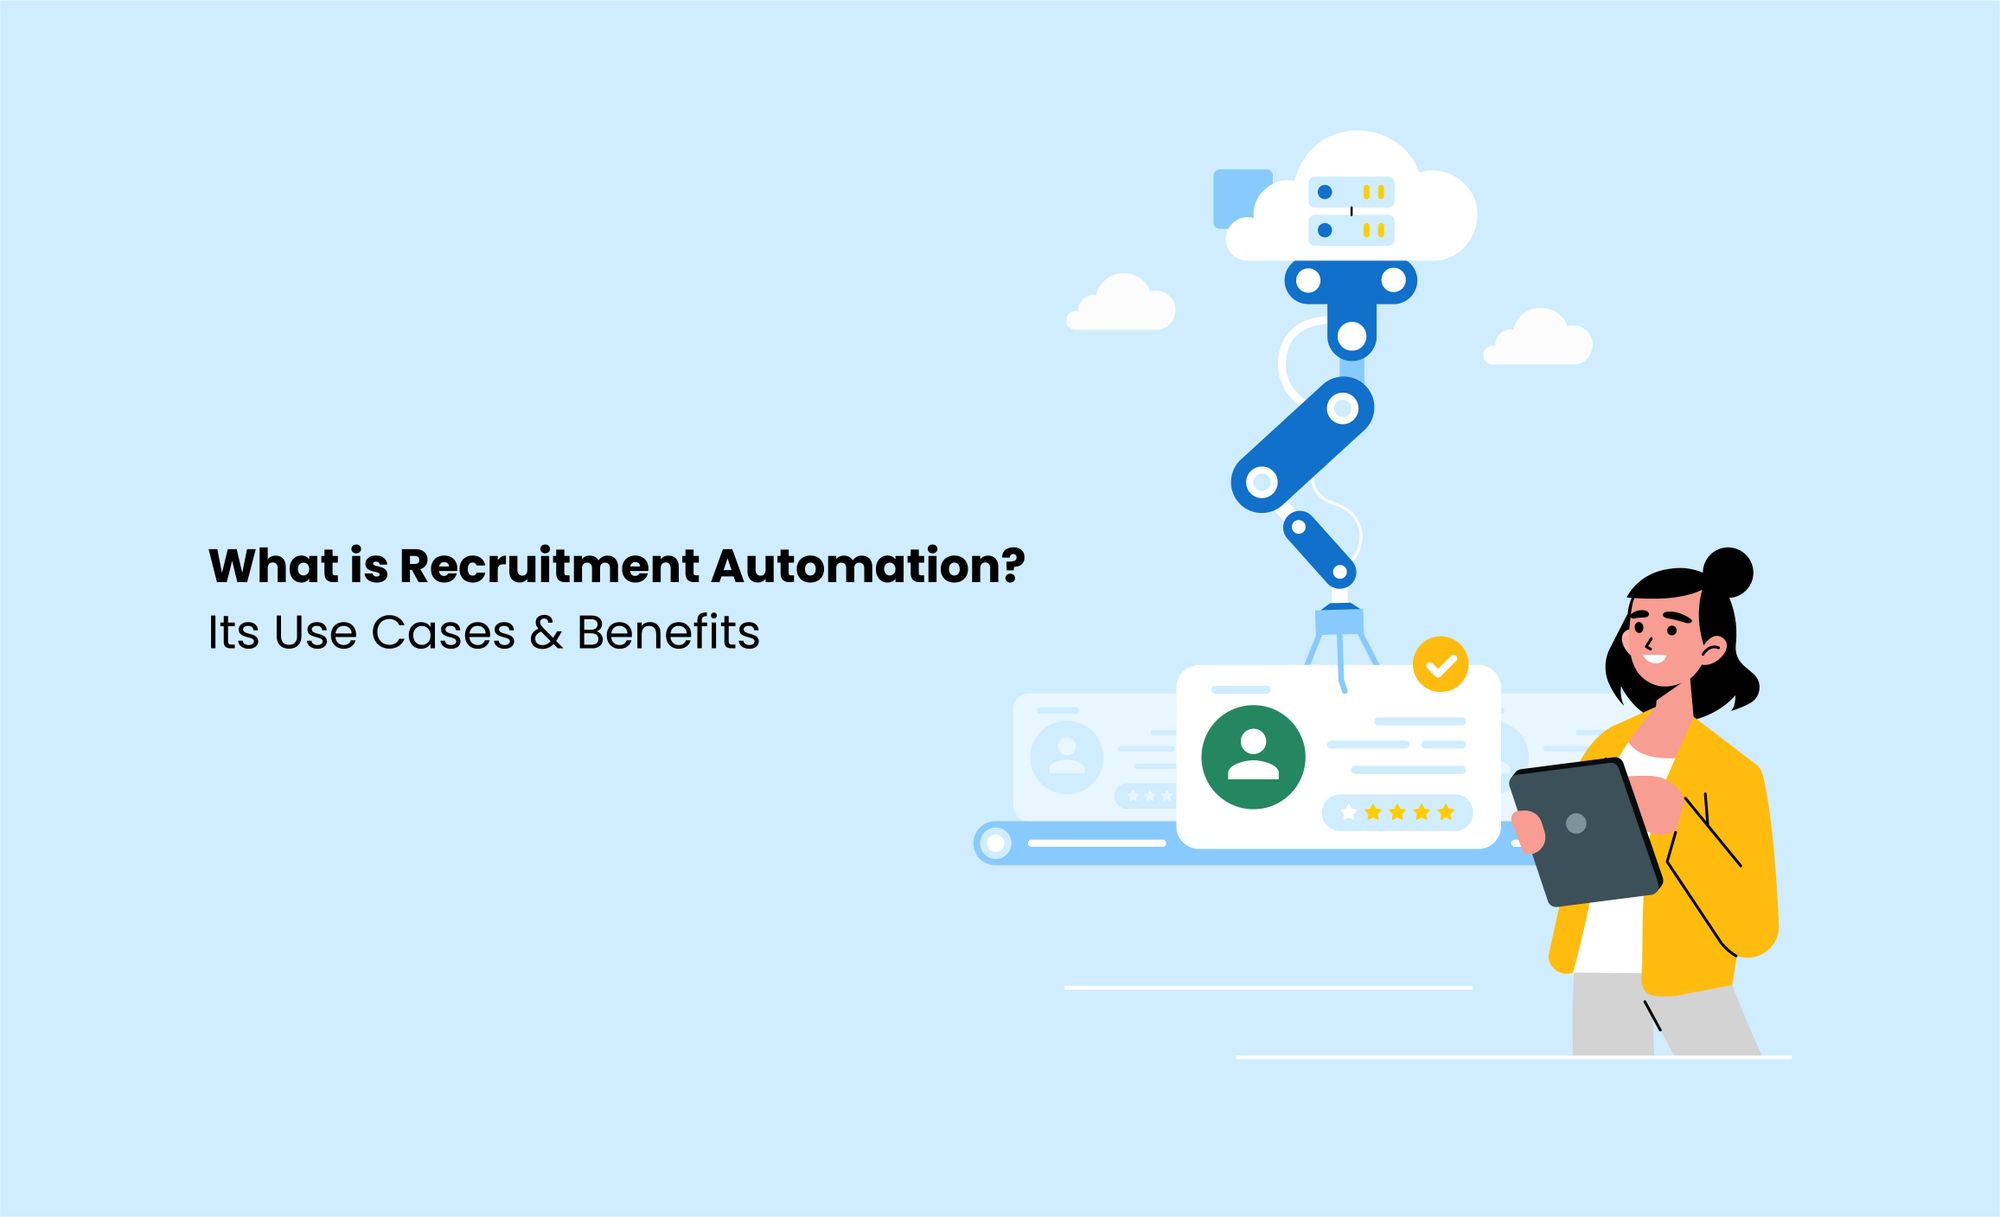 CRM for recruiters